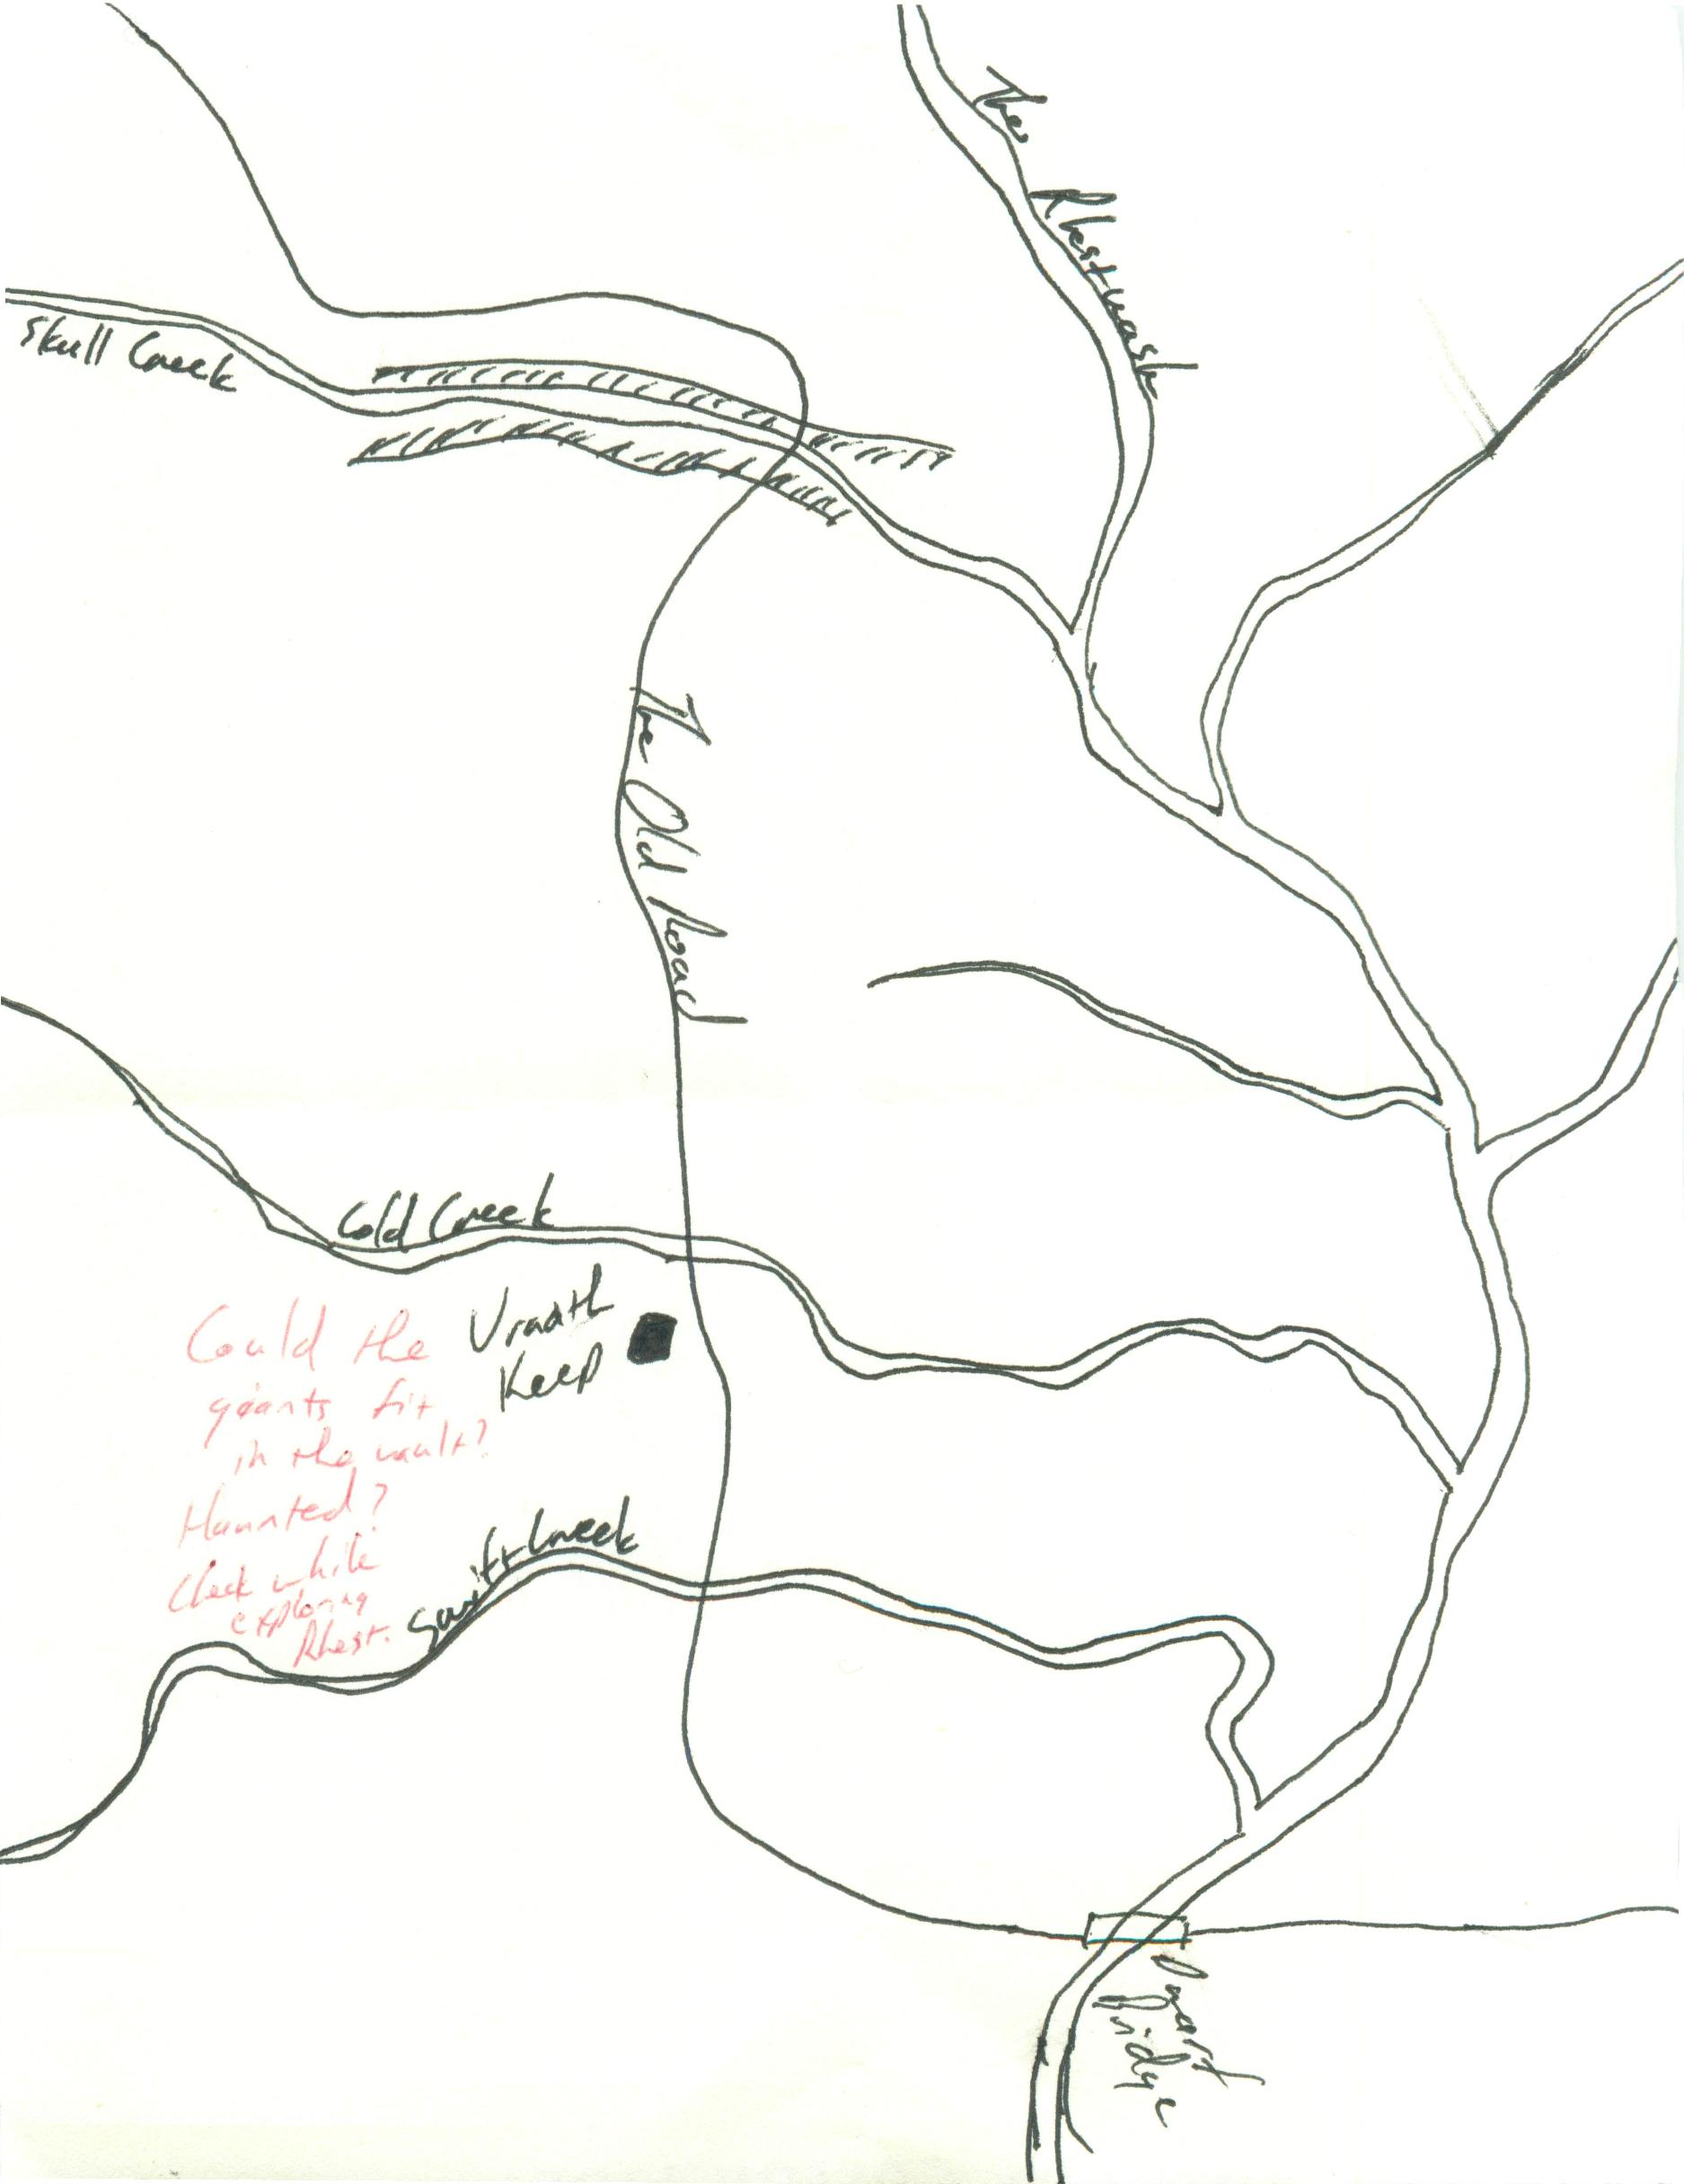 Map to Vradth Keep